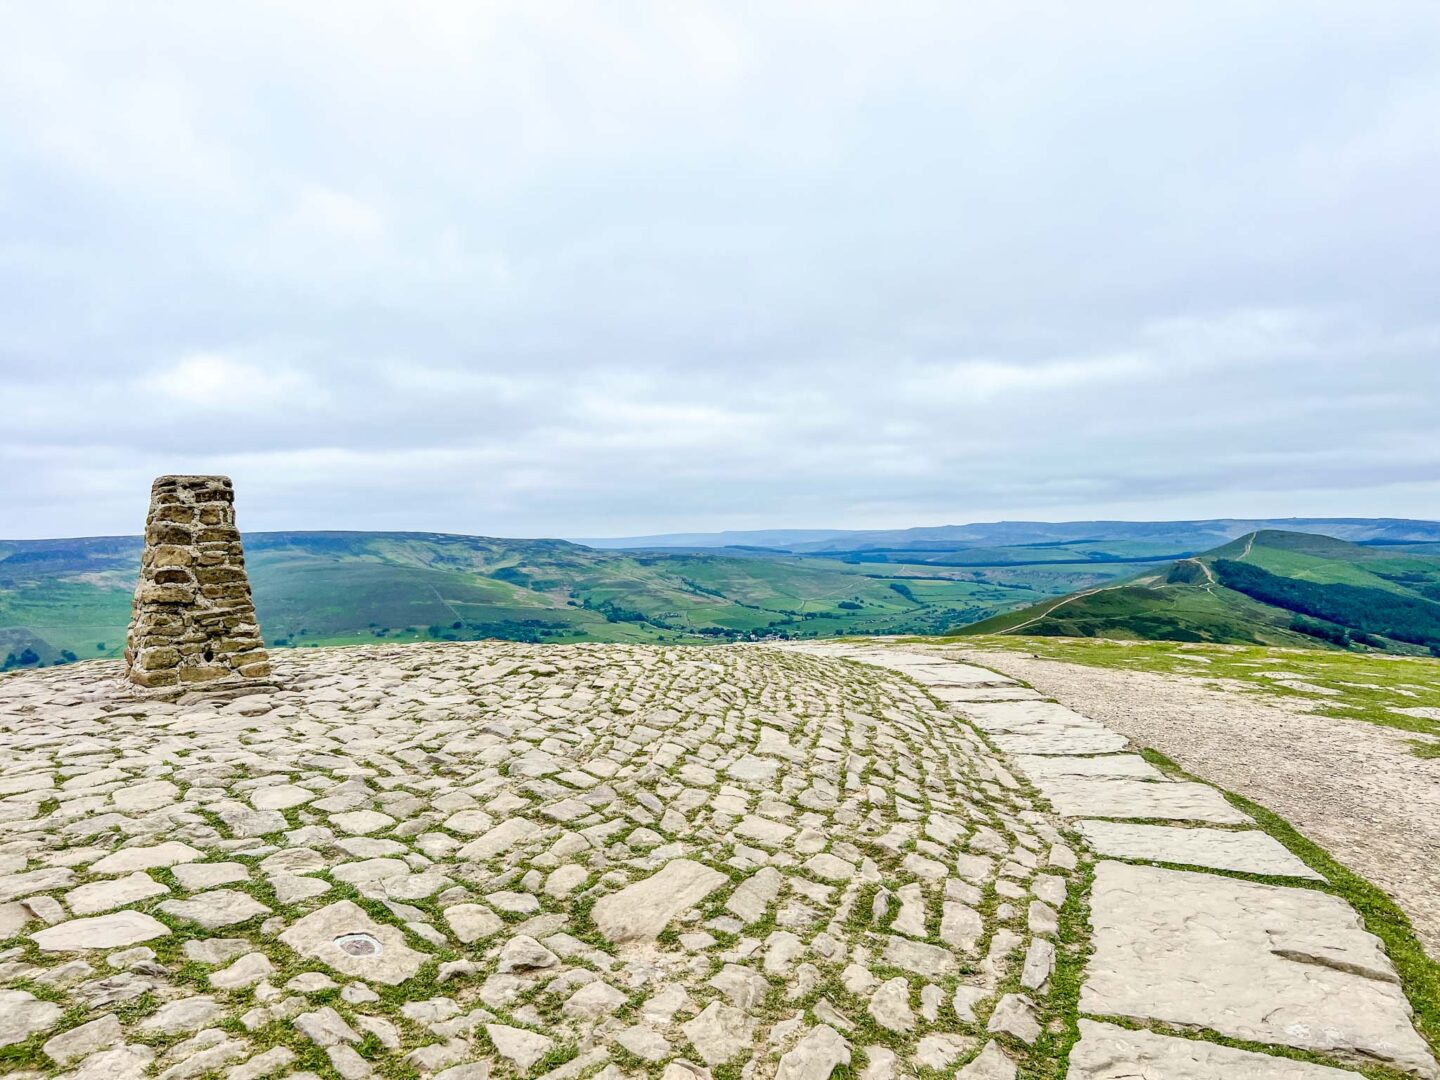 Peak District day out, top of Mam Tor